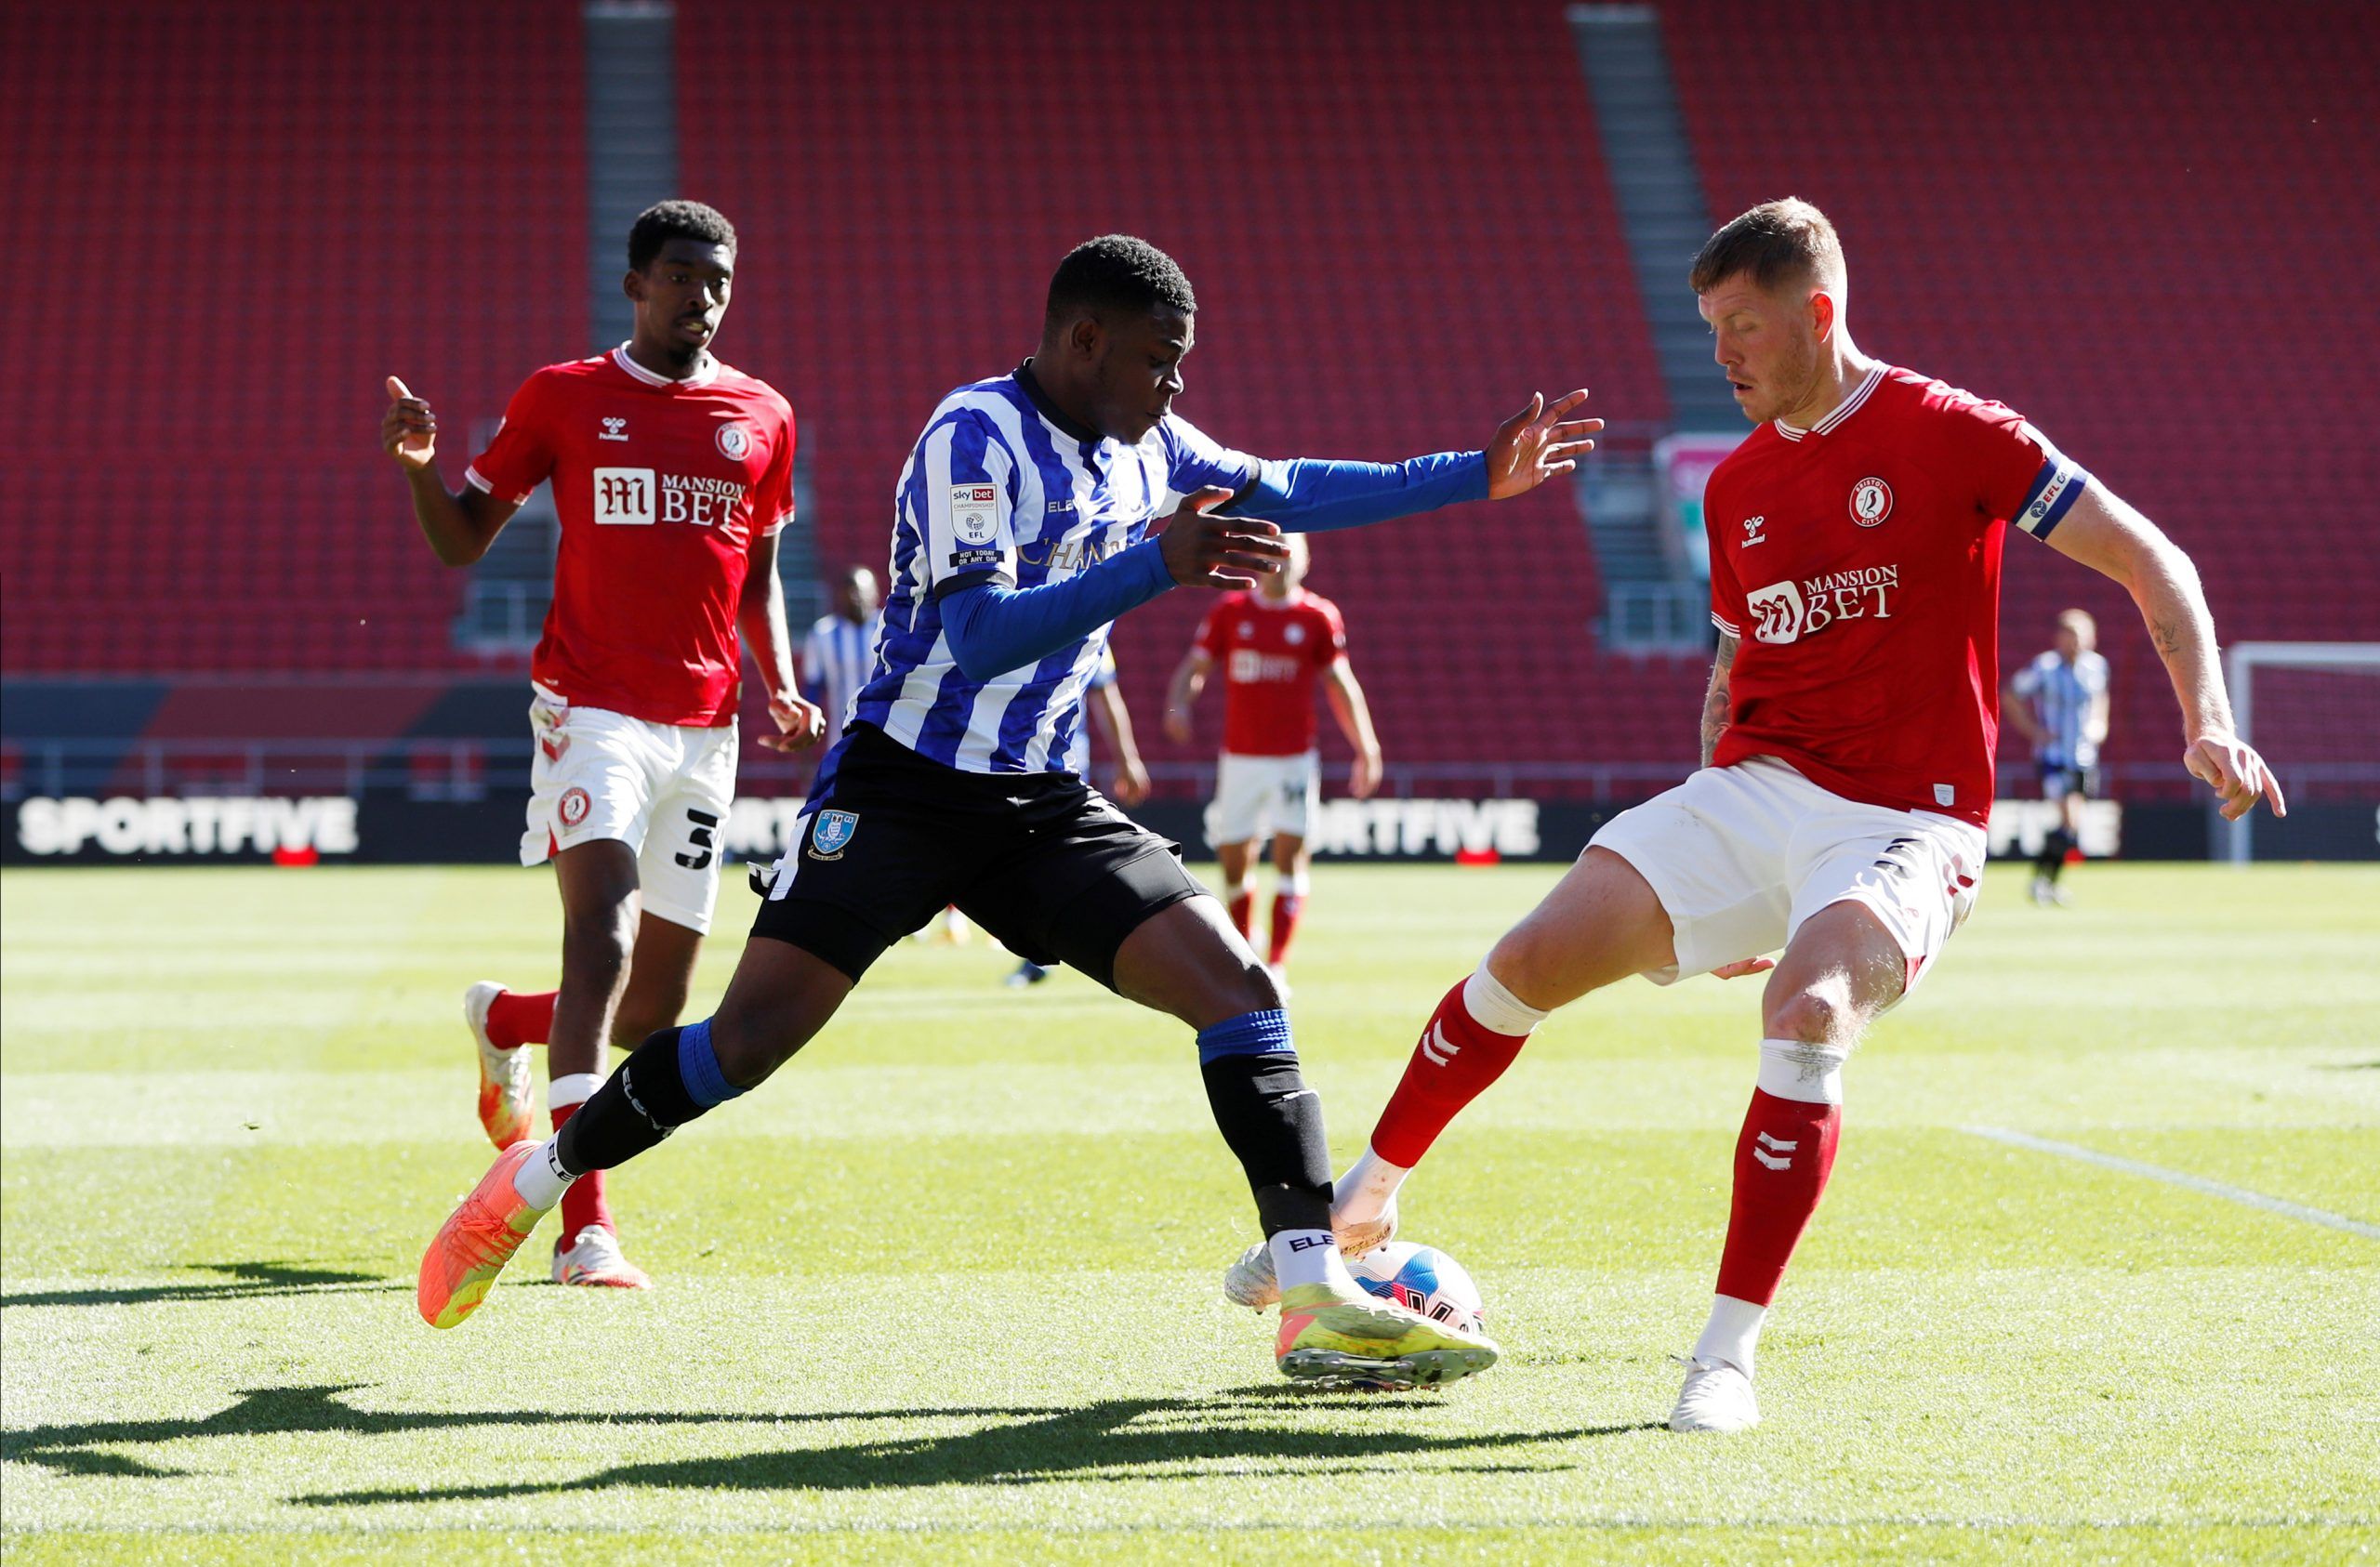 Soccer Football - Championship - Bristol City v Sheffield Wednesday - Ashton Gate Stadium, Bristol, Britain - September 27, 2020  Bristol City's Alfie Mawson in action with Sheffield Wednesday's Fisayo Dele-Bashiru   Action Images/Paul Childs  EDITORIAL USE ONLY. No use with unauthorized audio, video, data, fixture lists, club/league logos or 